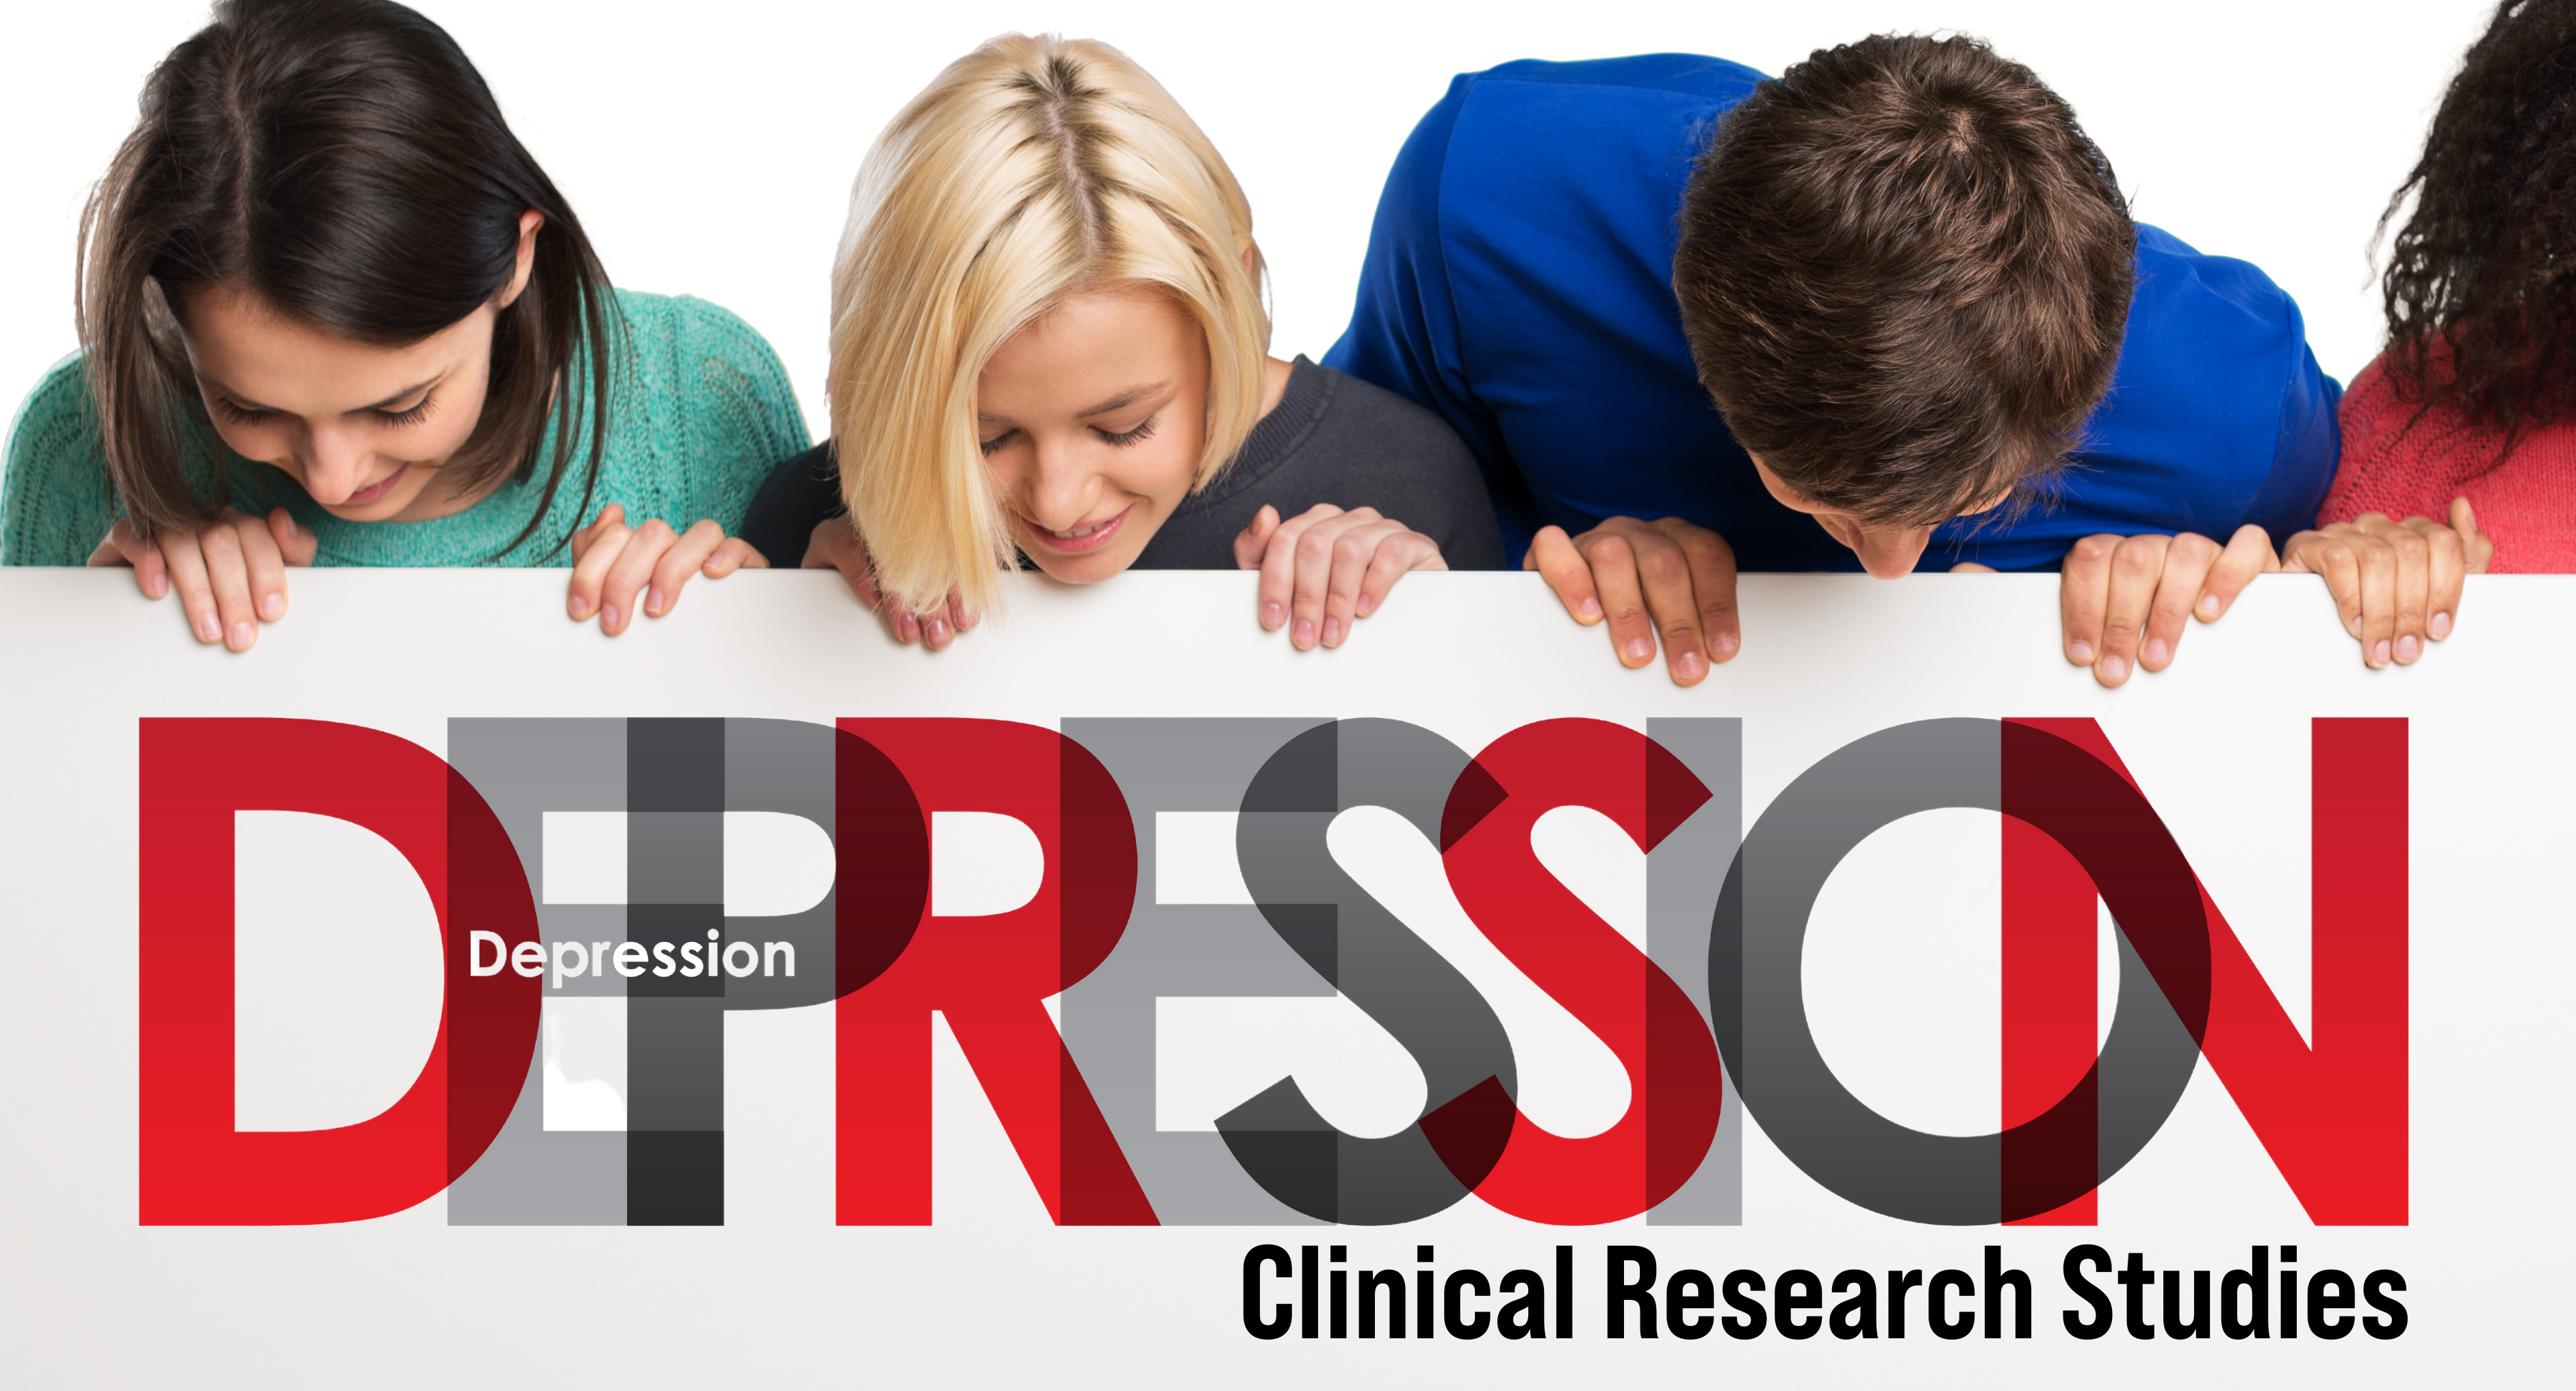 Clinical Research Studies for Depression